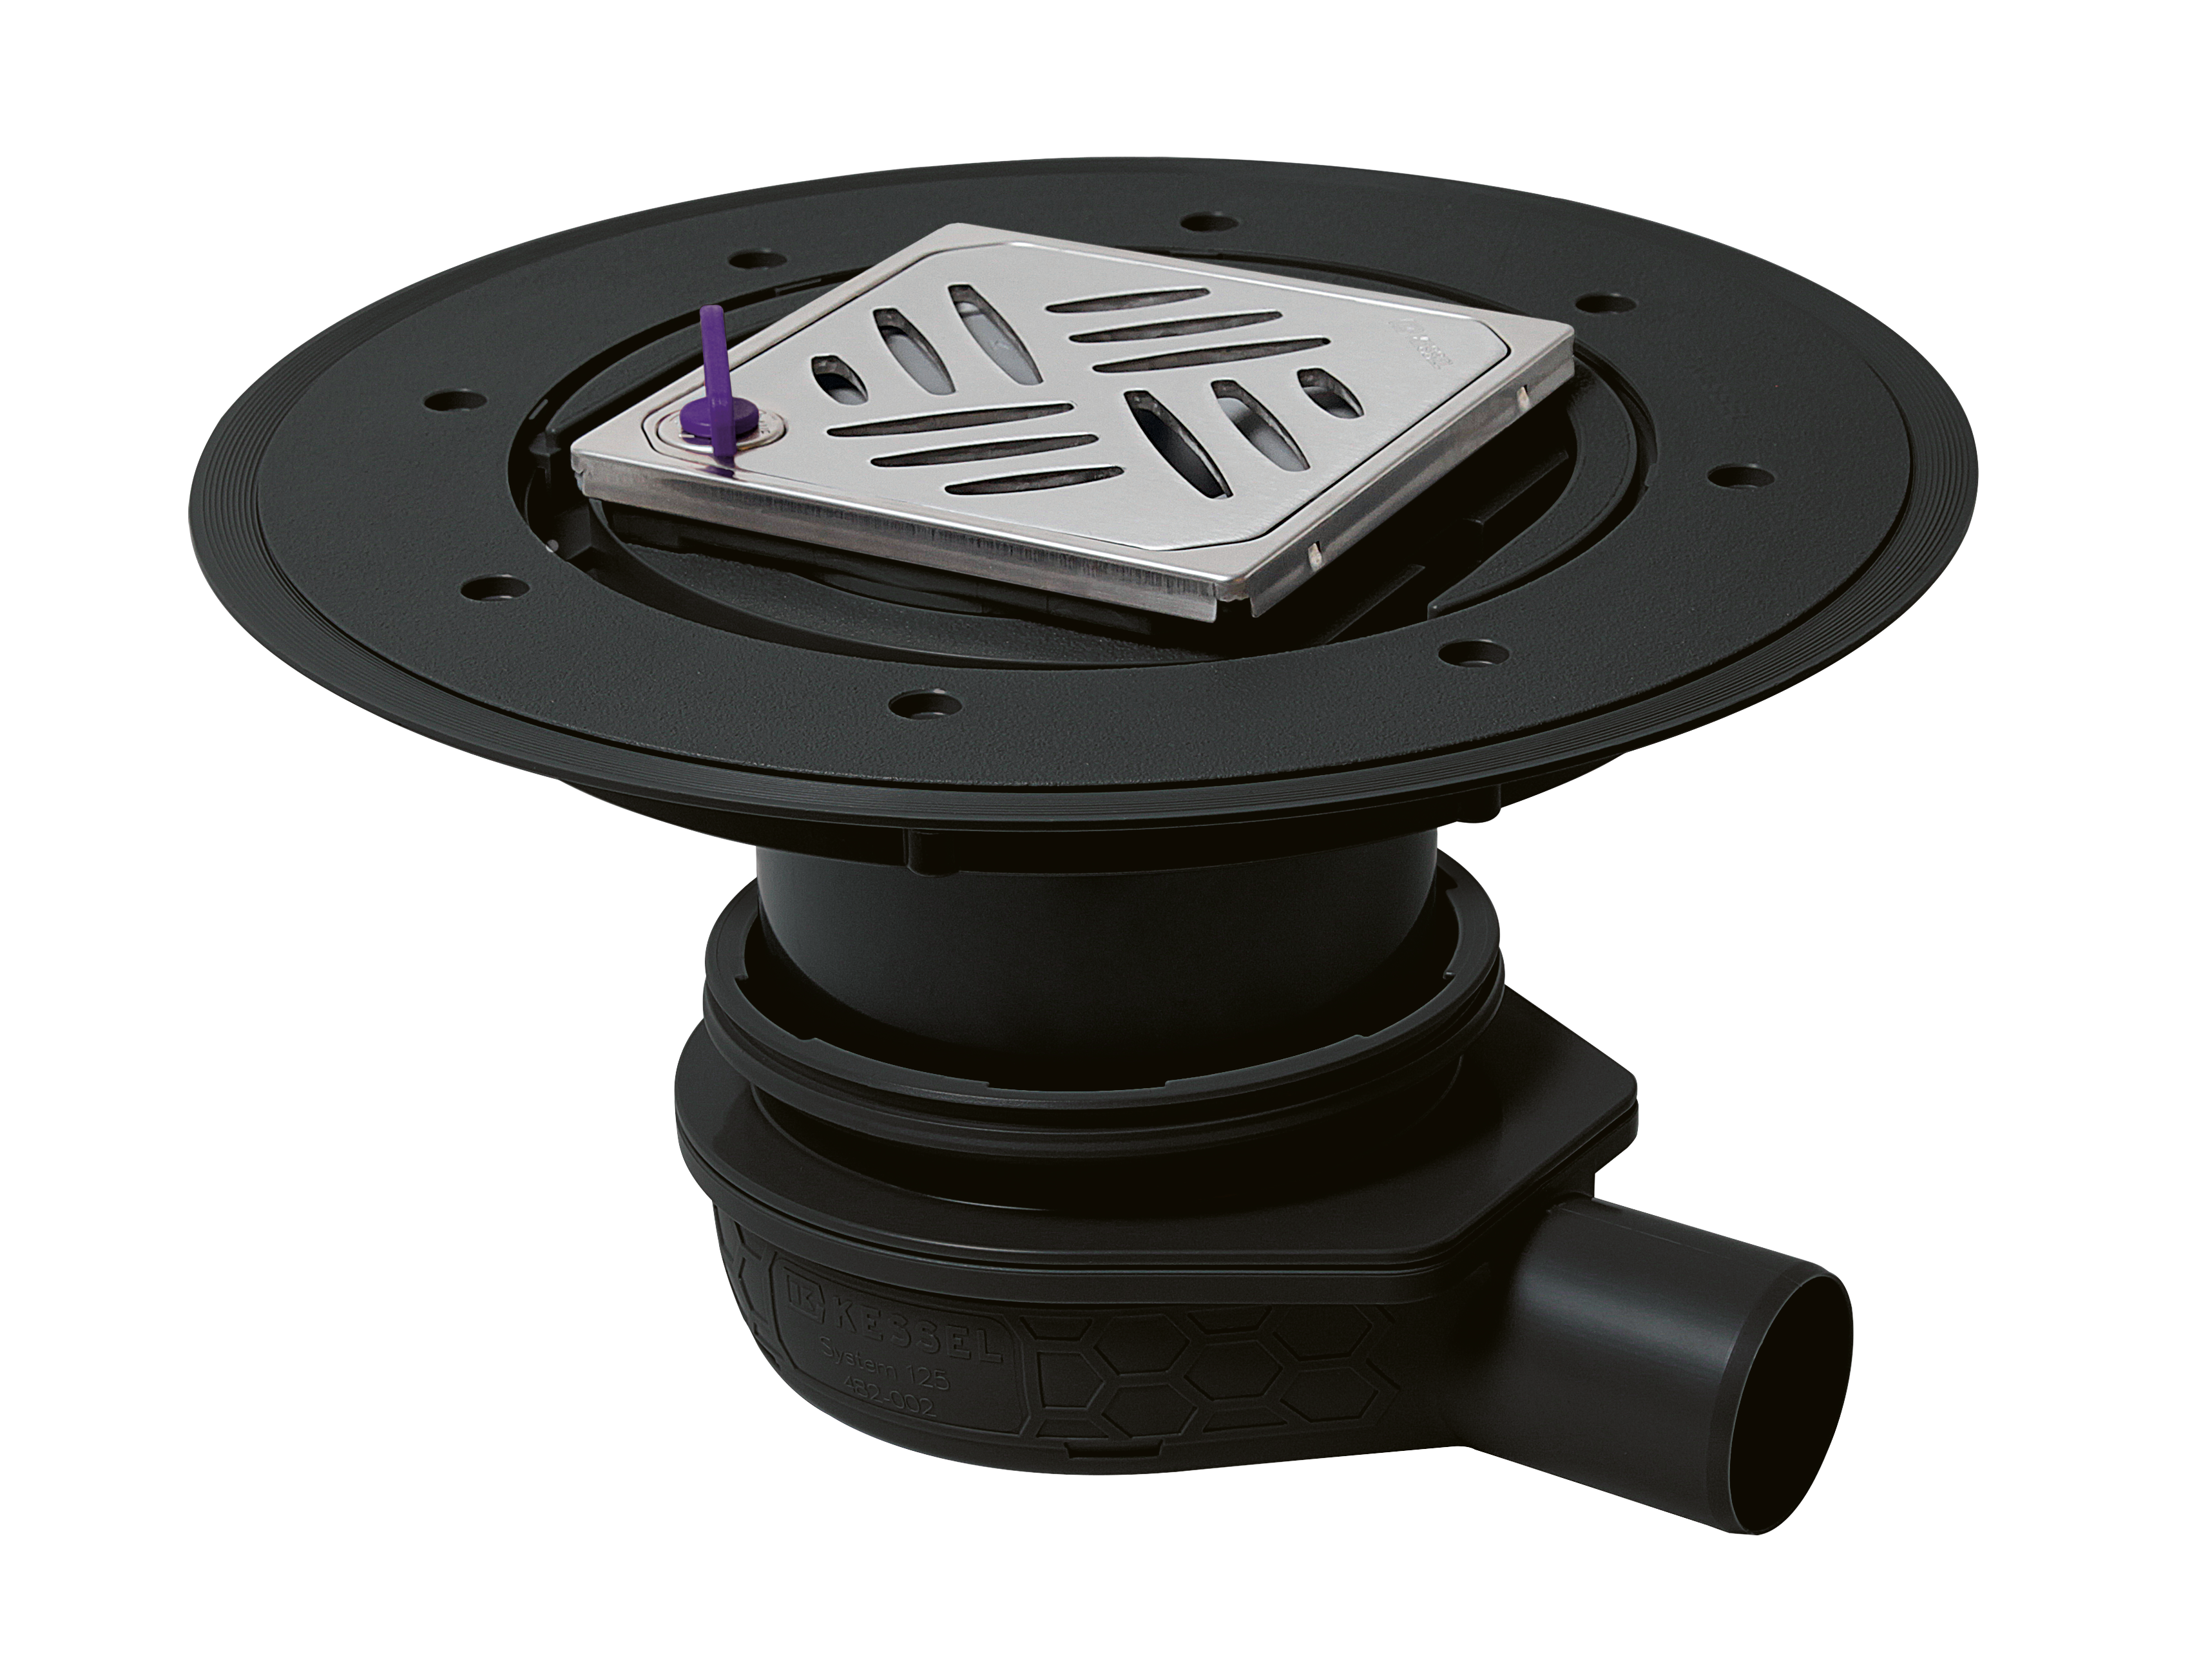 The Ultraflat 79 bathroom drain, DN 50, with a Variofix upper section, Kessel design cover and Lock & Lift locking system